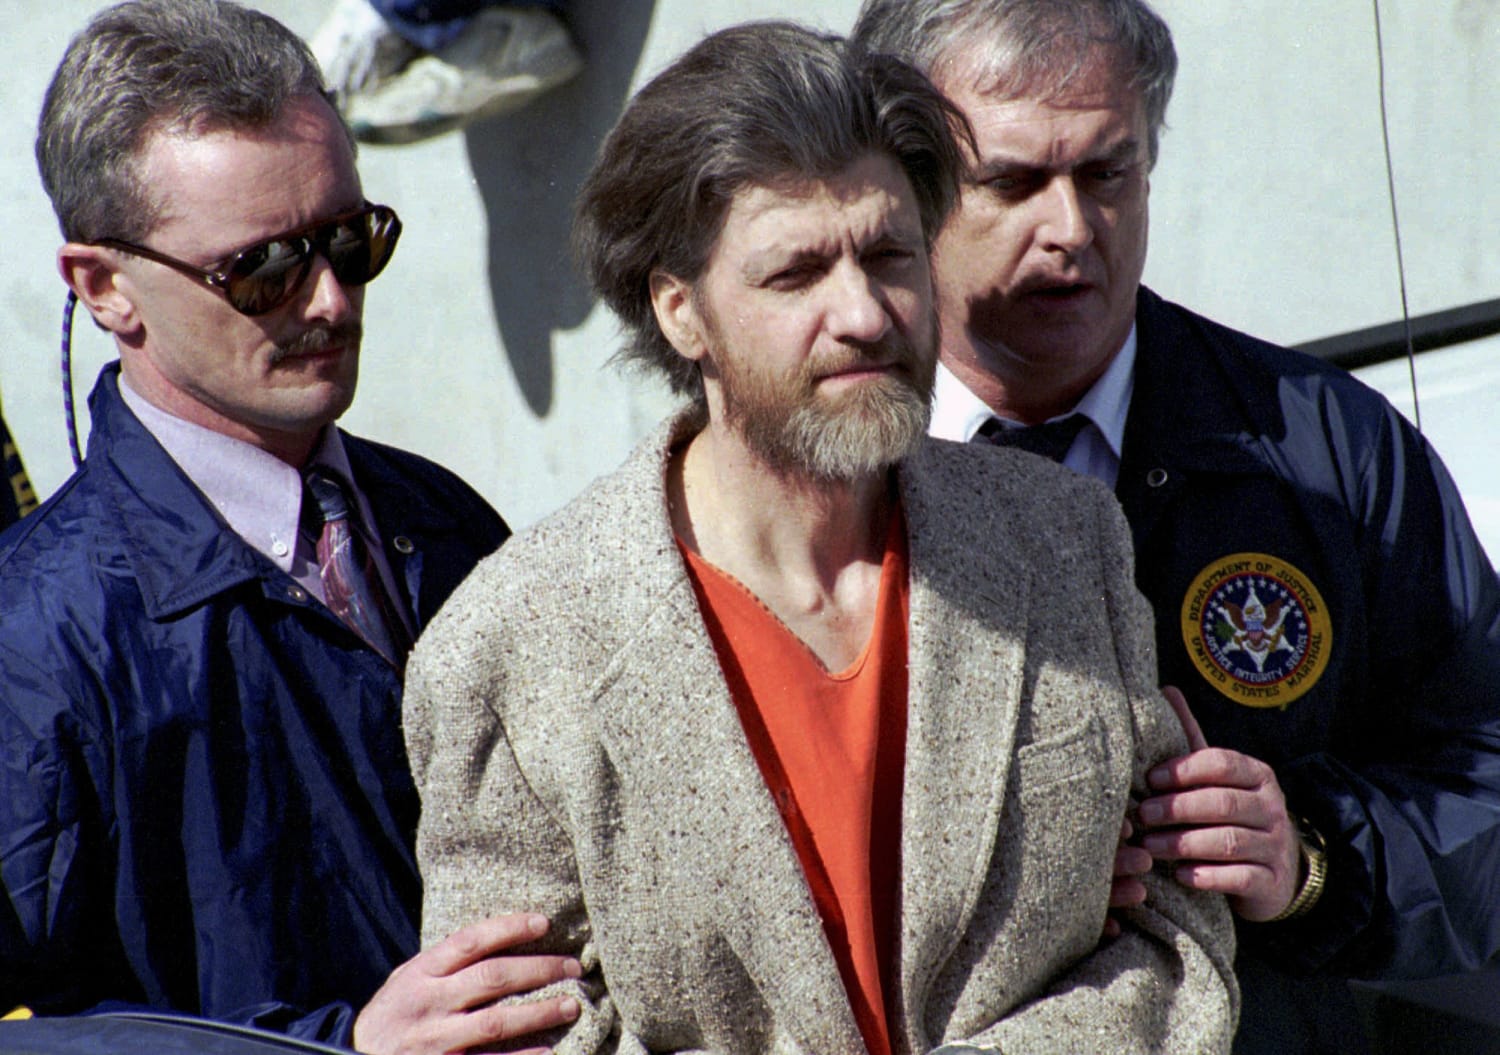 'Unabomber' Ted Kaczynski found dead in his prison cell